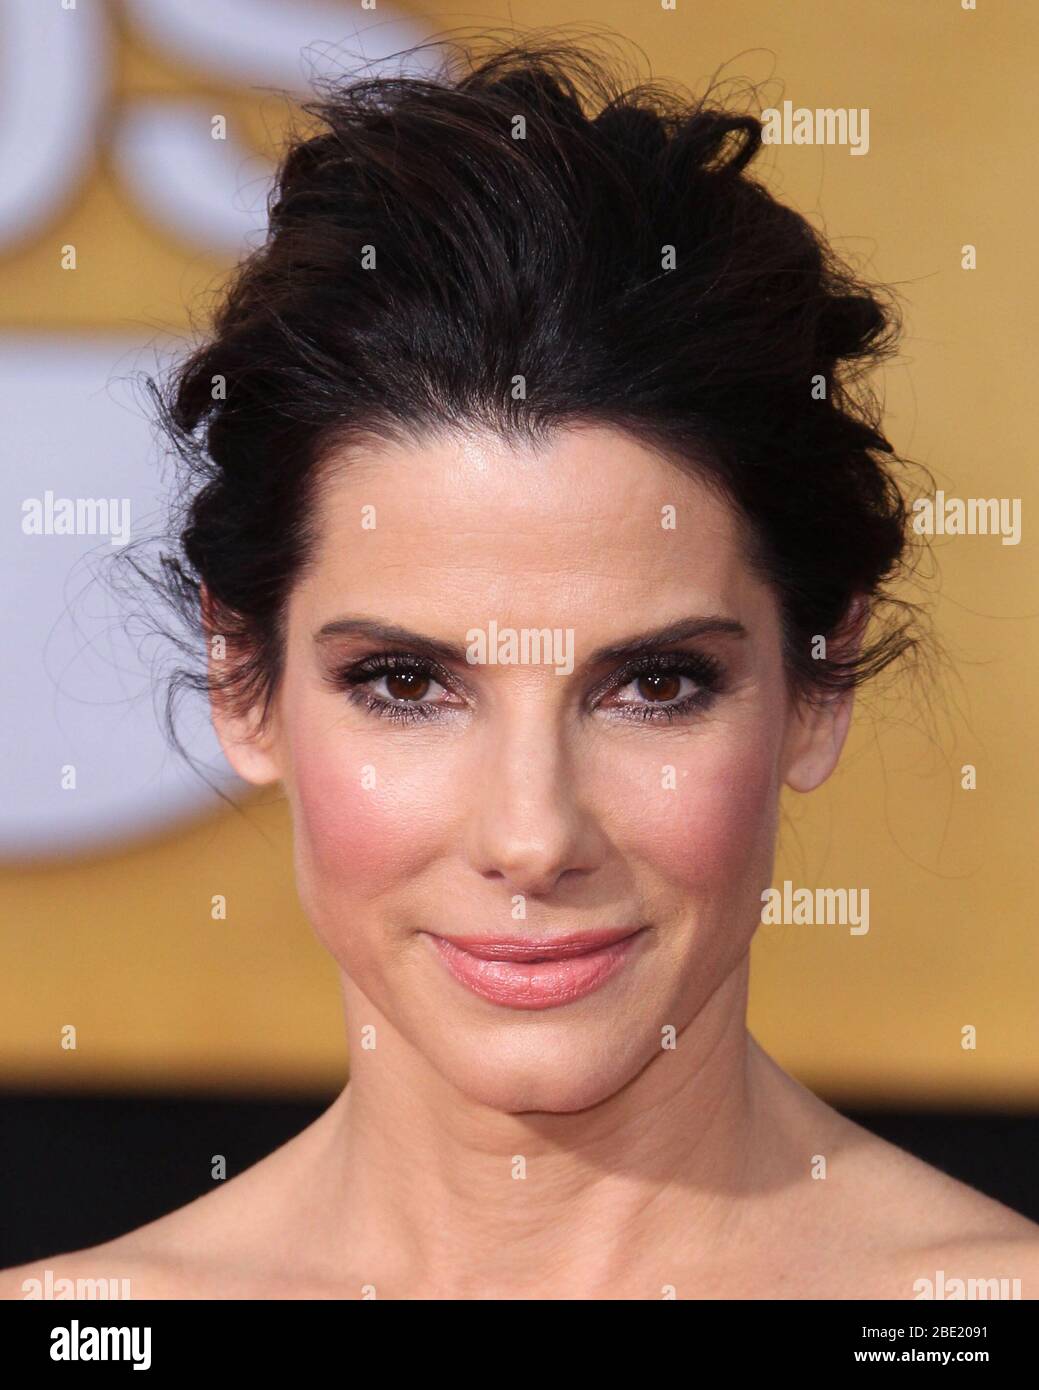 Los Angeles, United States. 11th Apr, 2020. (FILE) Sandra Bullock Donates 6,000 N95 Masks To Los Angeles Hospitals Amid Coronavirus COVID-19 Pandemic. LOS ANGELES, CALIFORNIA, USA - JANUARY 18: Actress Sandra Bullock wearing a Lanvin dress, Jimmy Choo shoes, Roger Vivier clutch, and Fred Leighton jewelry arrives at the 20th Annual Screen Actors Guild Awards held at The Shrine Auditorium on January 18, 2014 in Los Angeles, California, United States. (Photo by Xavier Collin/Image Press Agency) Credit: Image Press Agency/Alamy Live News Stock Photo